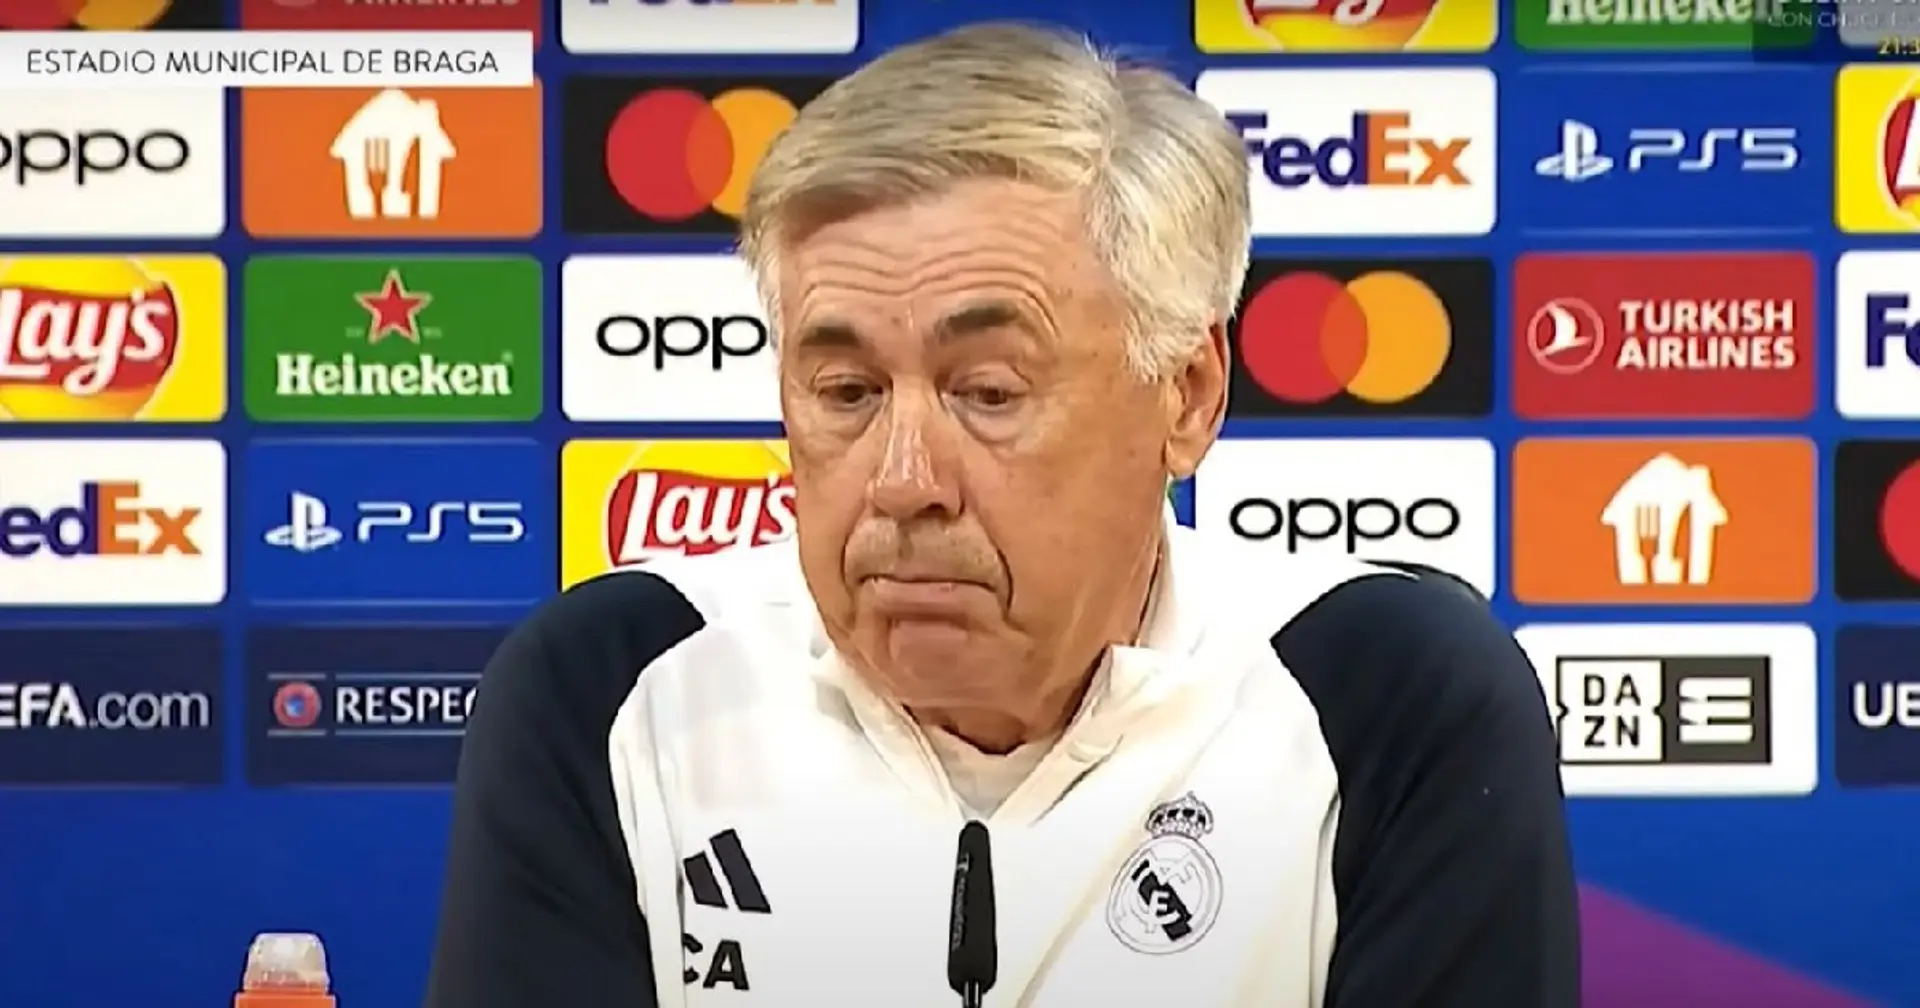 Real Madrid to finalise new Ancelotti deal & 2 more big stories you might've missed